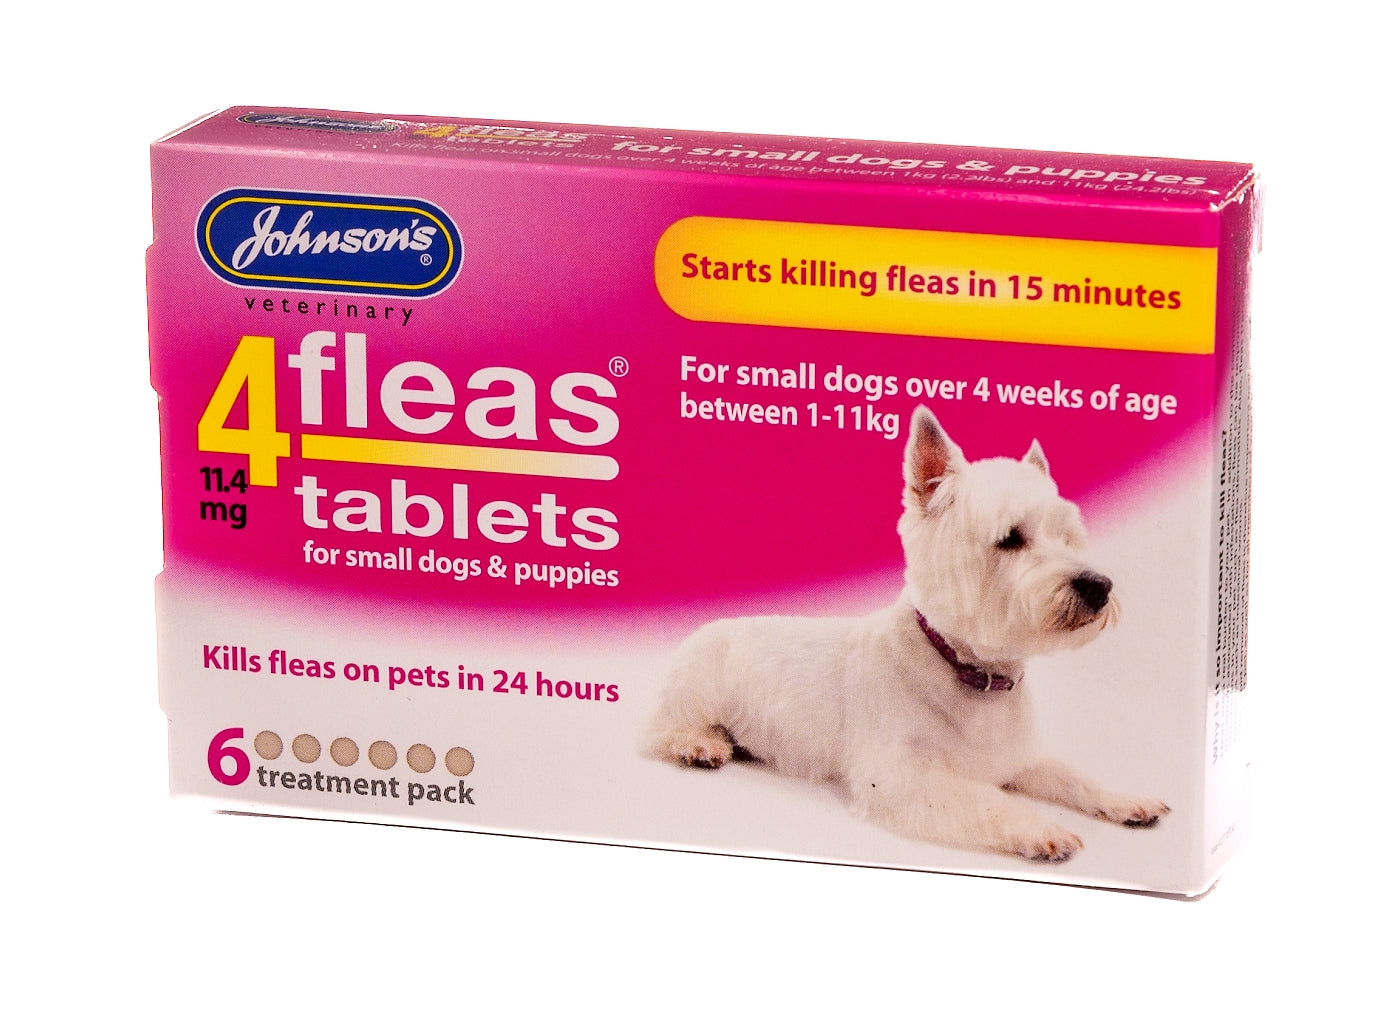 Johnson's - 4fleas Tablets for Puppies and Small Dogs - 6 x tablets